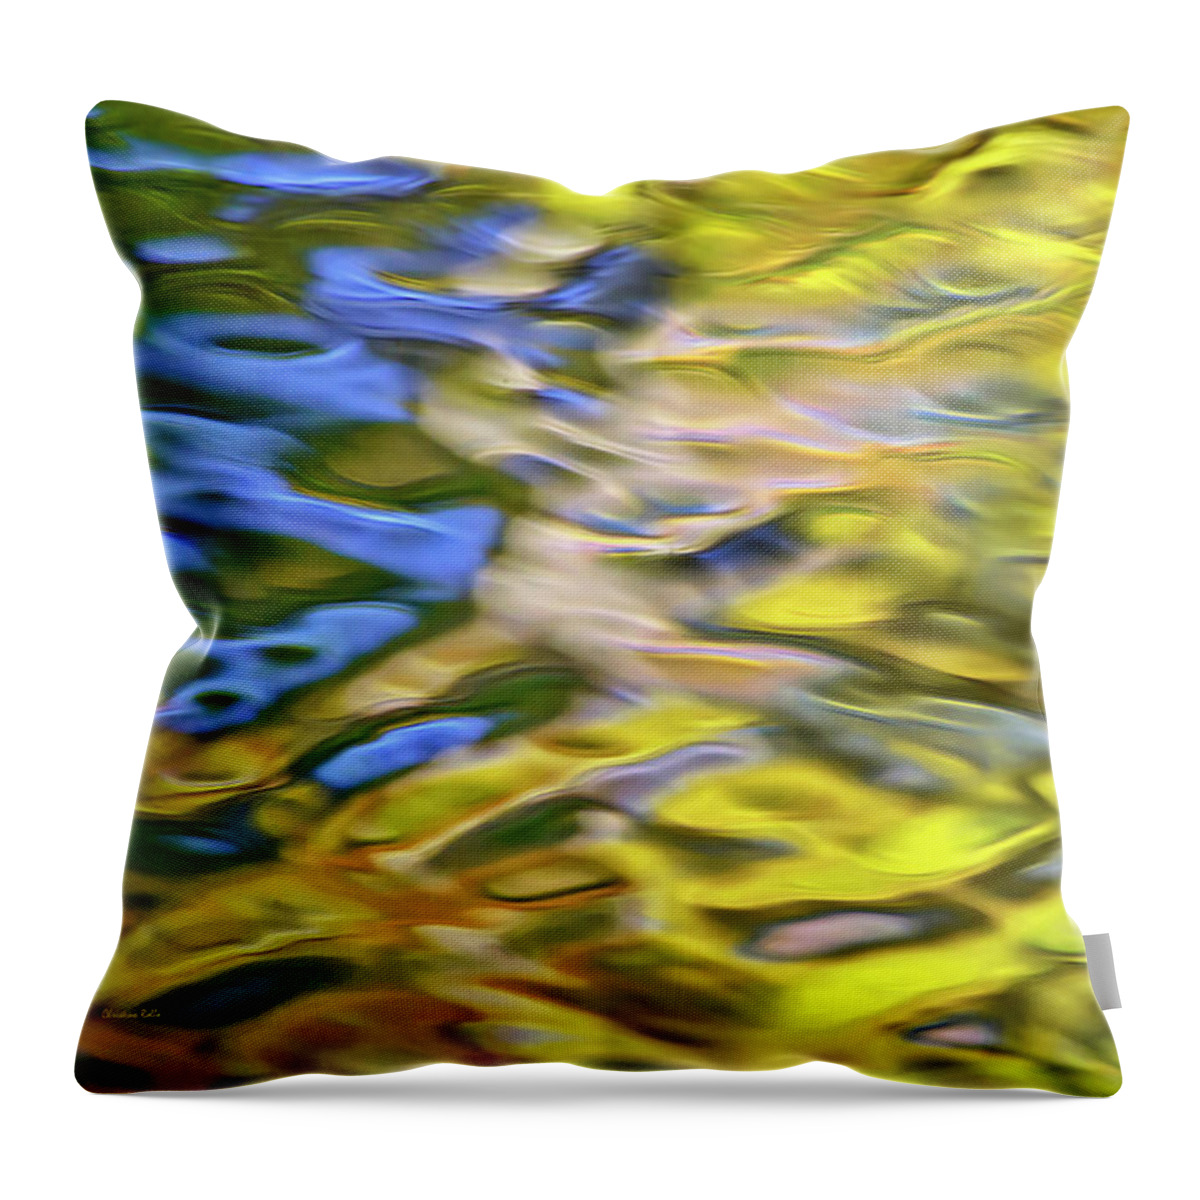 Abstract Throw Pillow featuring the photograph Mojave Gold Mosaic Abstract Art by Christina Rollo